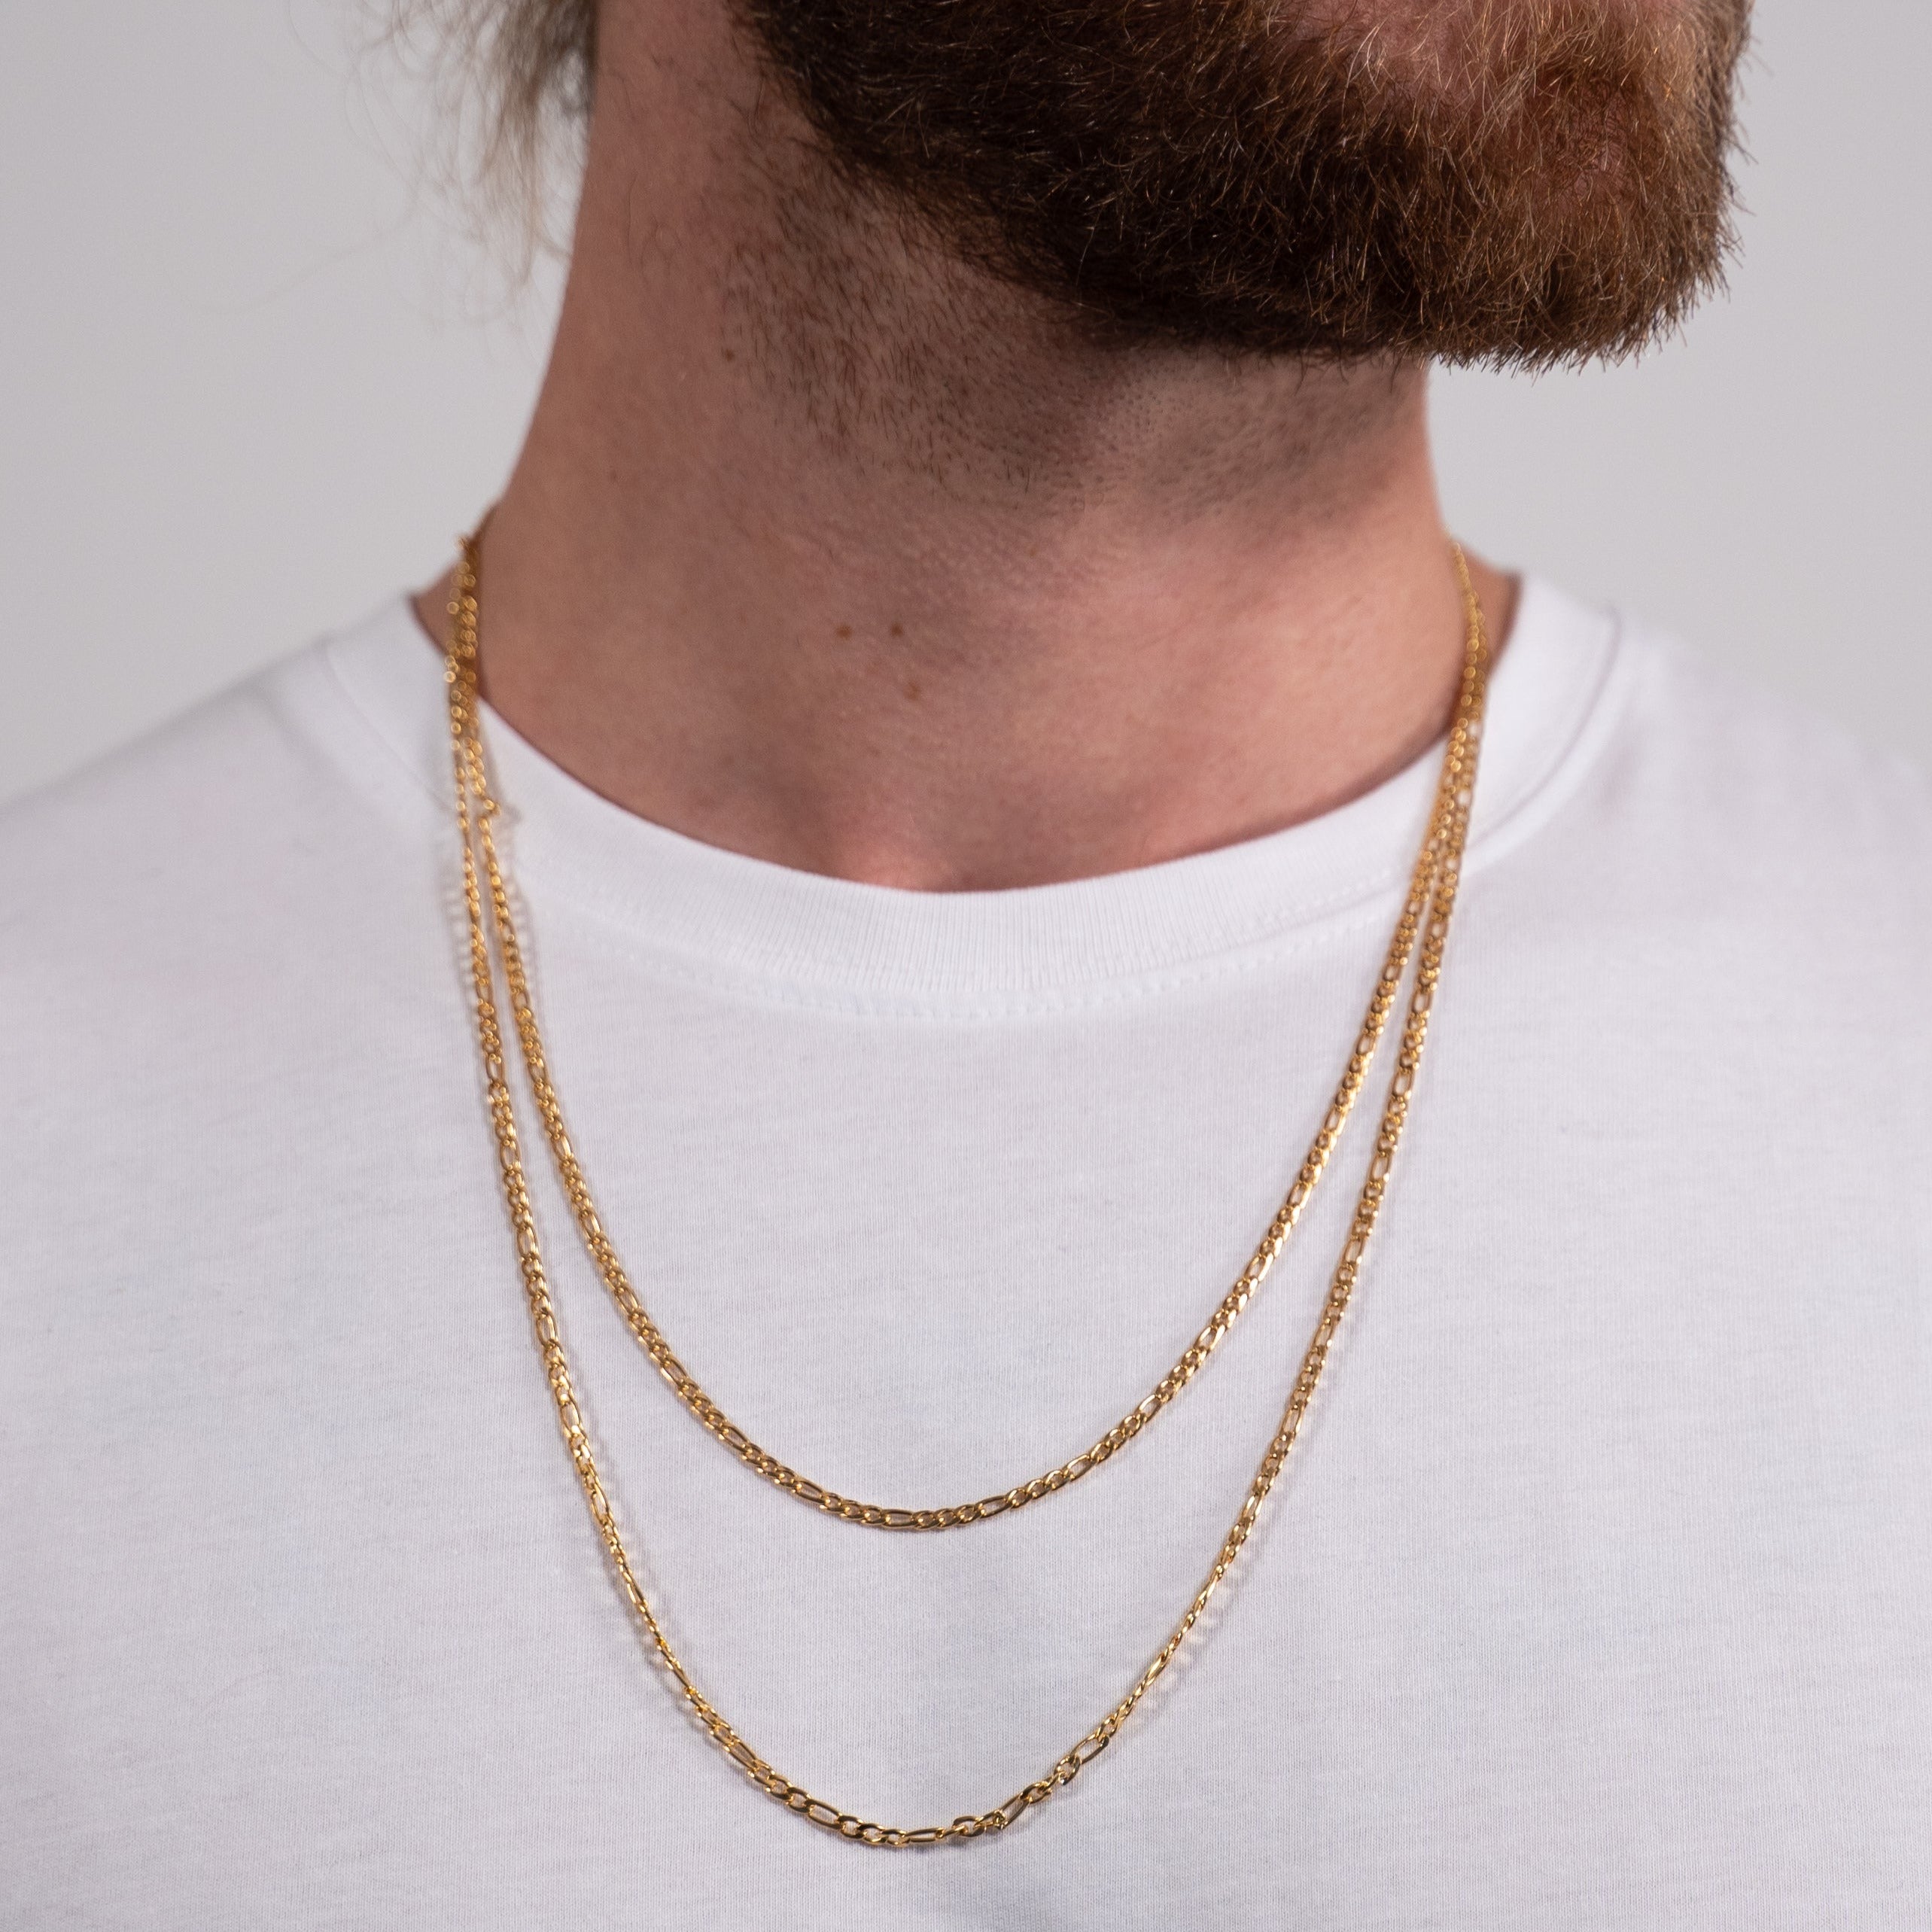 NL Double Antique chain - Gold-toned